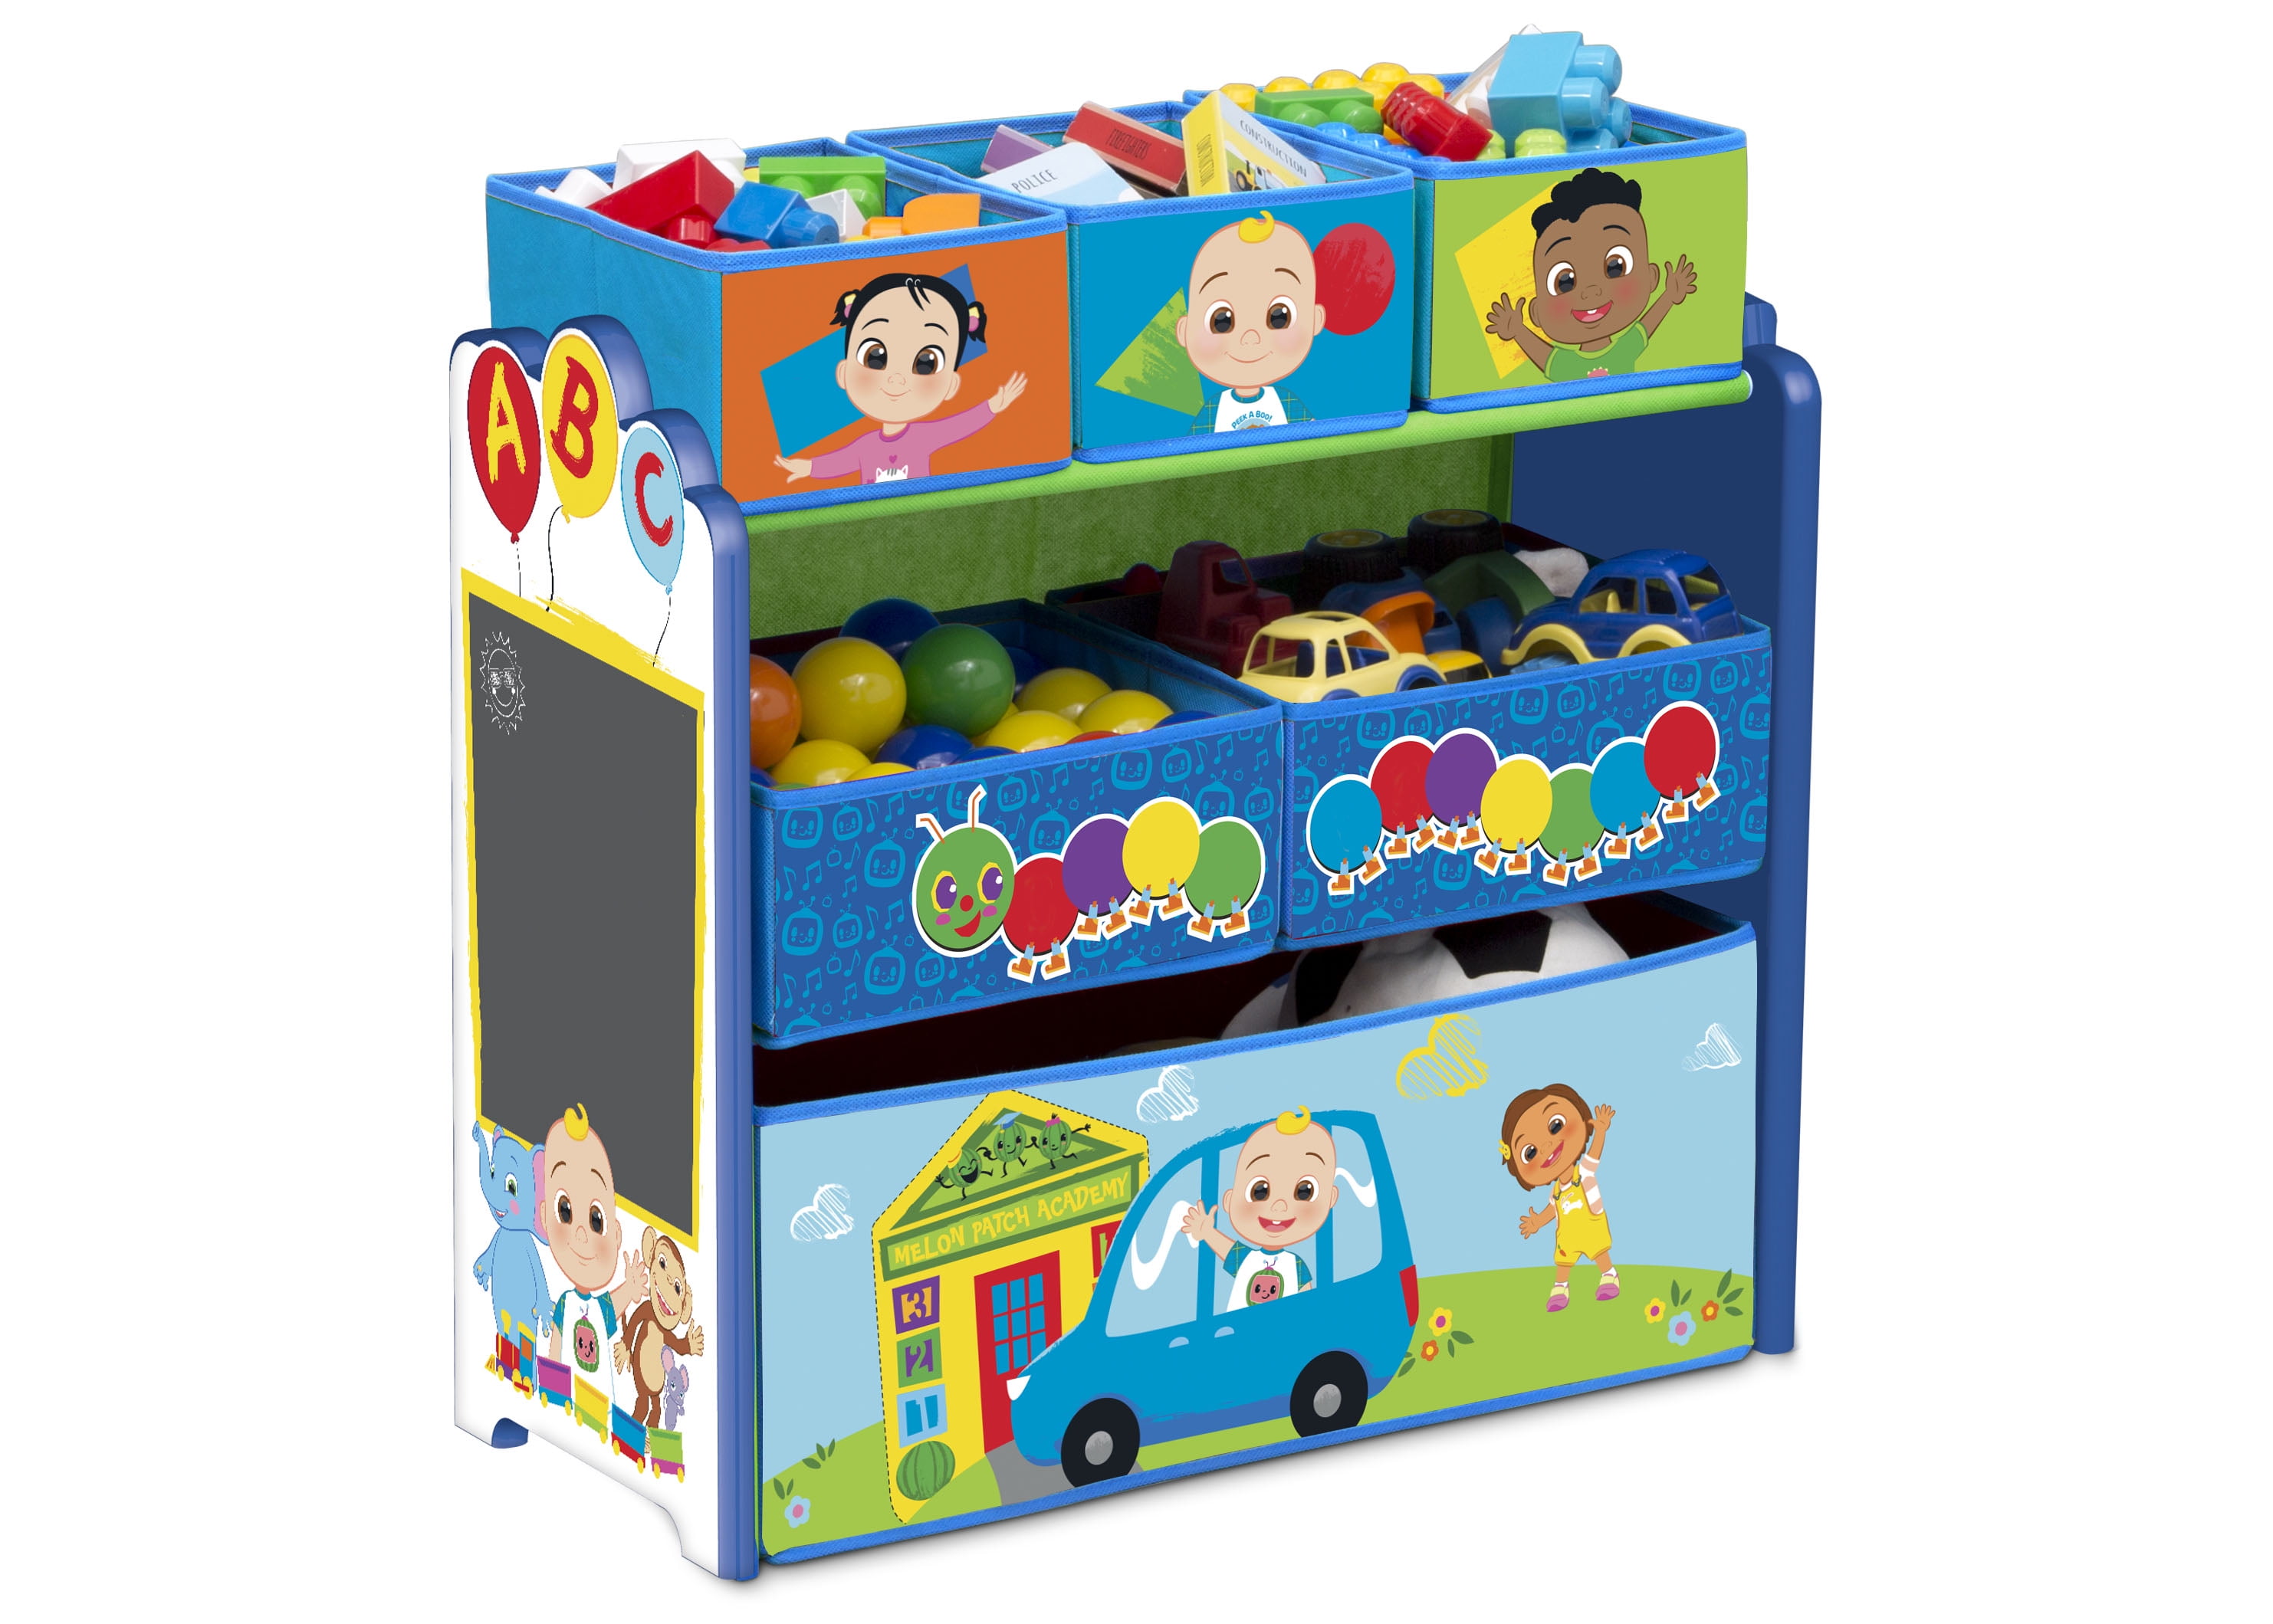 Disney Princess 4-Piece Room-in-a-Box Bedroom Set by Delta Children -  Includes Sleep & Play Toddler Bed, 6 Bin Design & Store Toy Organizer and  Art Desk with Chair - Walmart.com